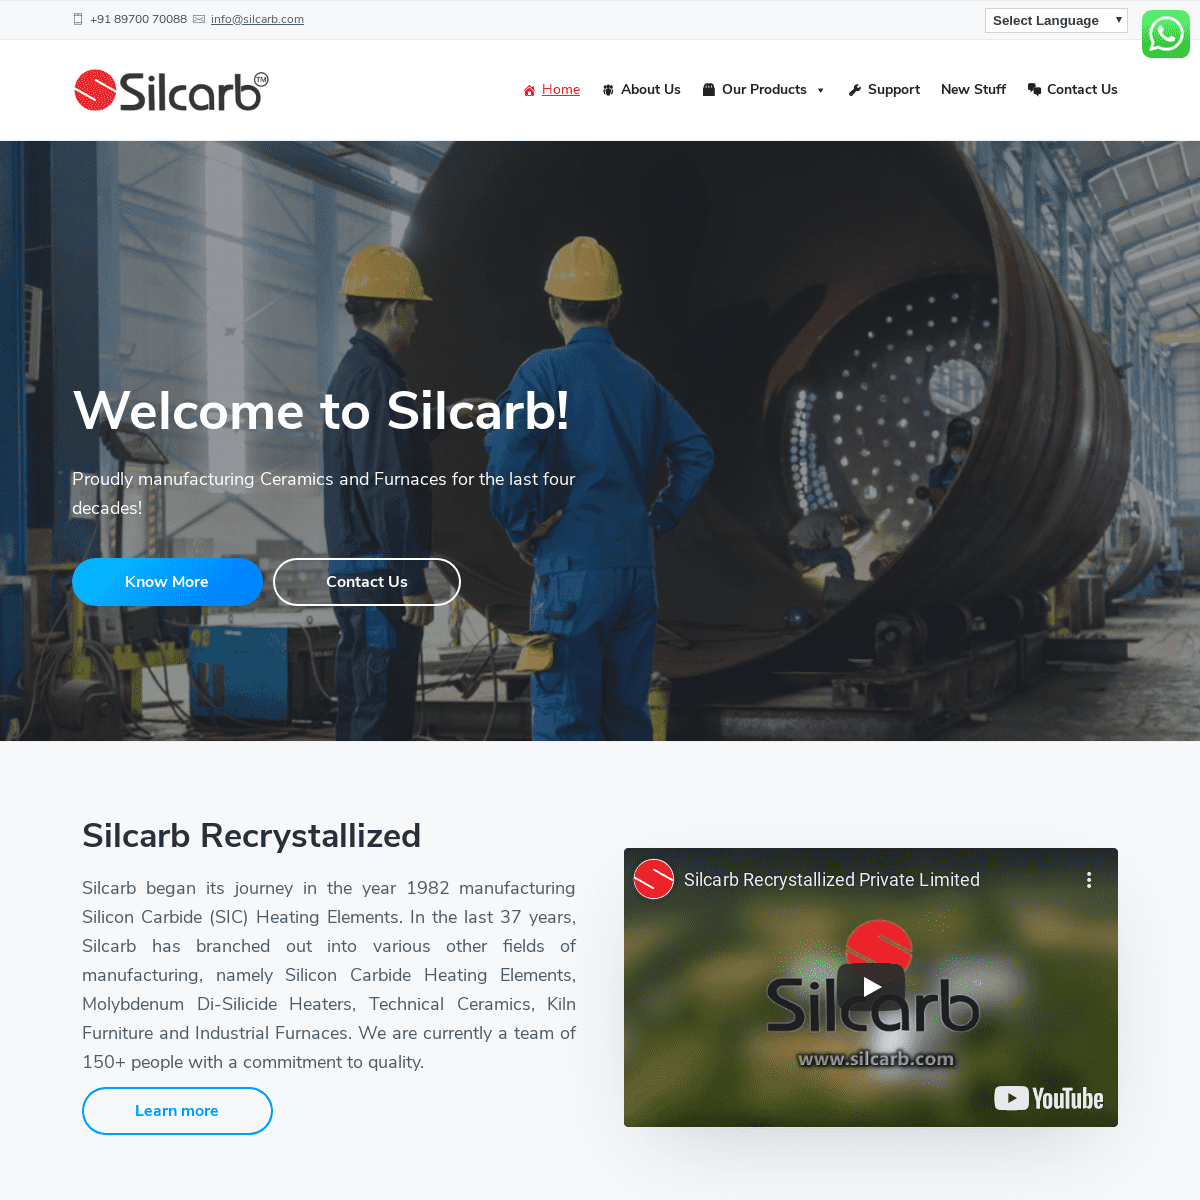 A complete backup of silcarb.com